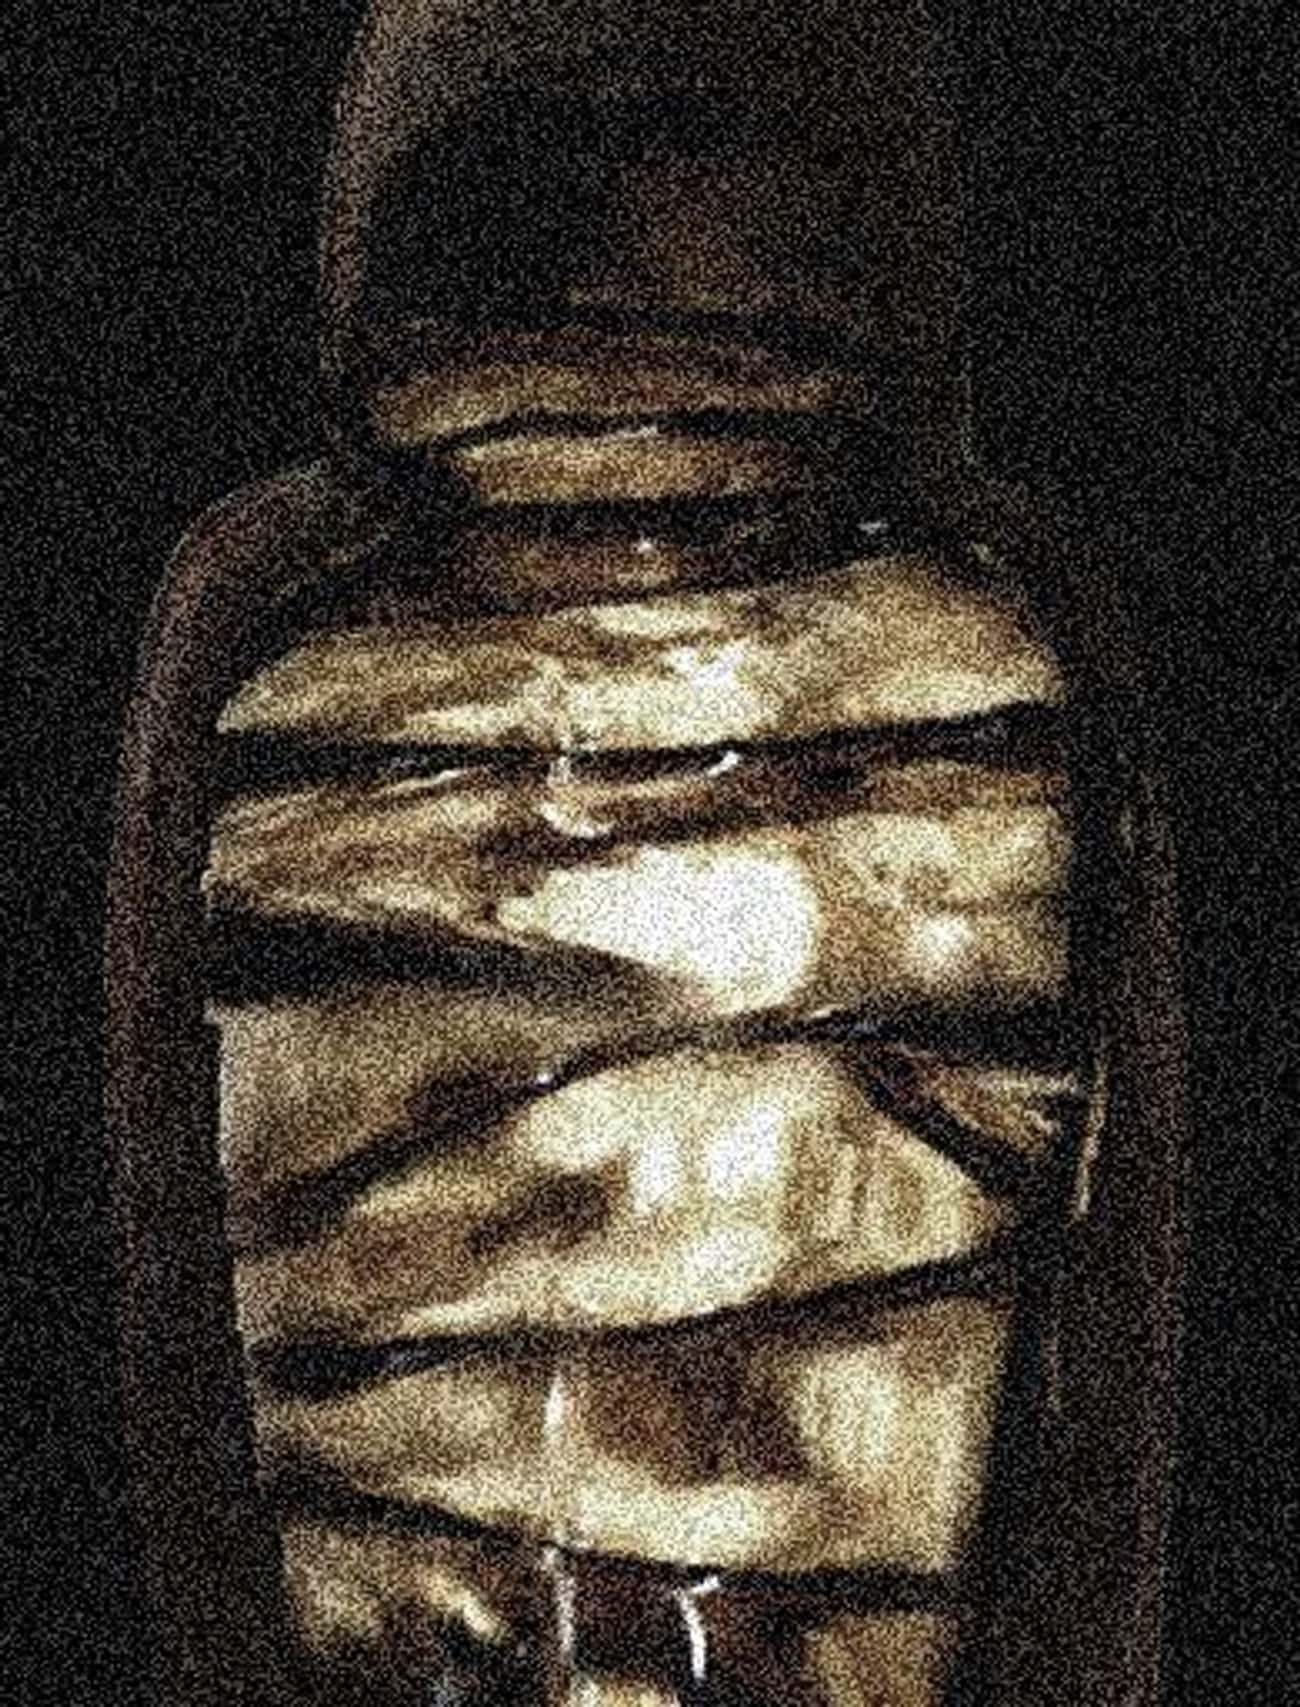 People Turned Themselves Into Honey Mummies To Be Eaten